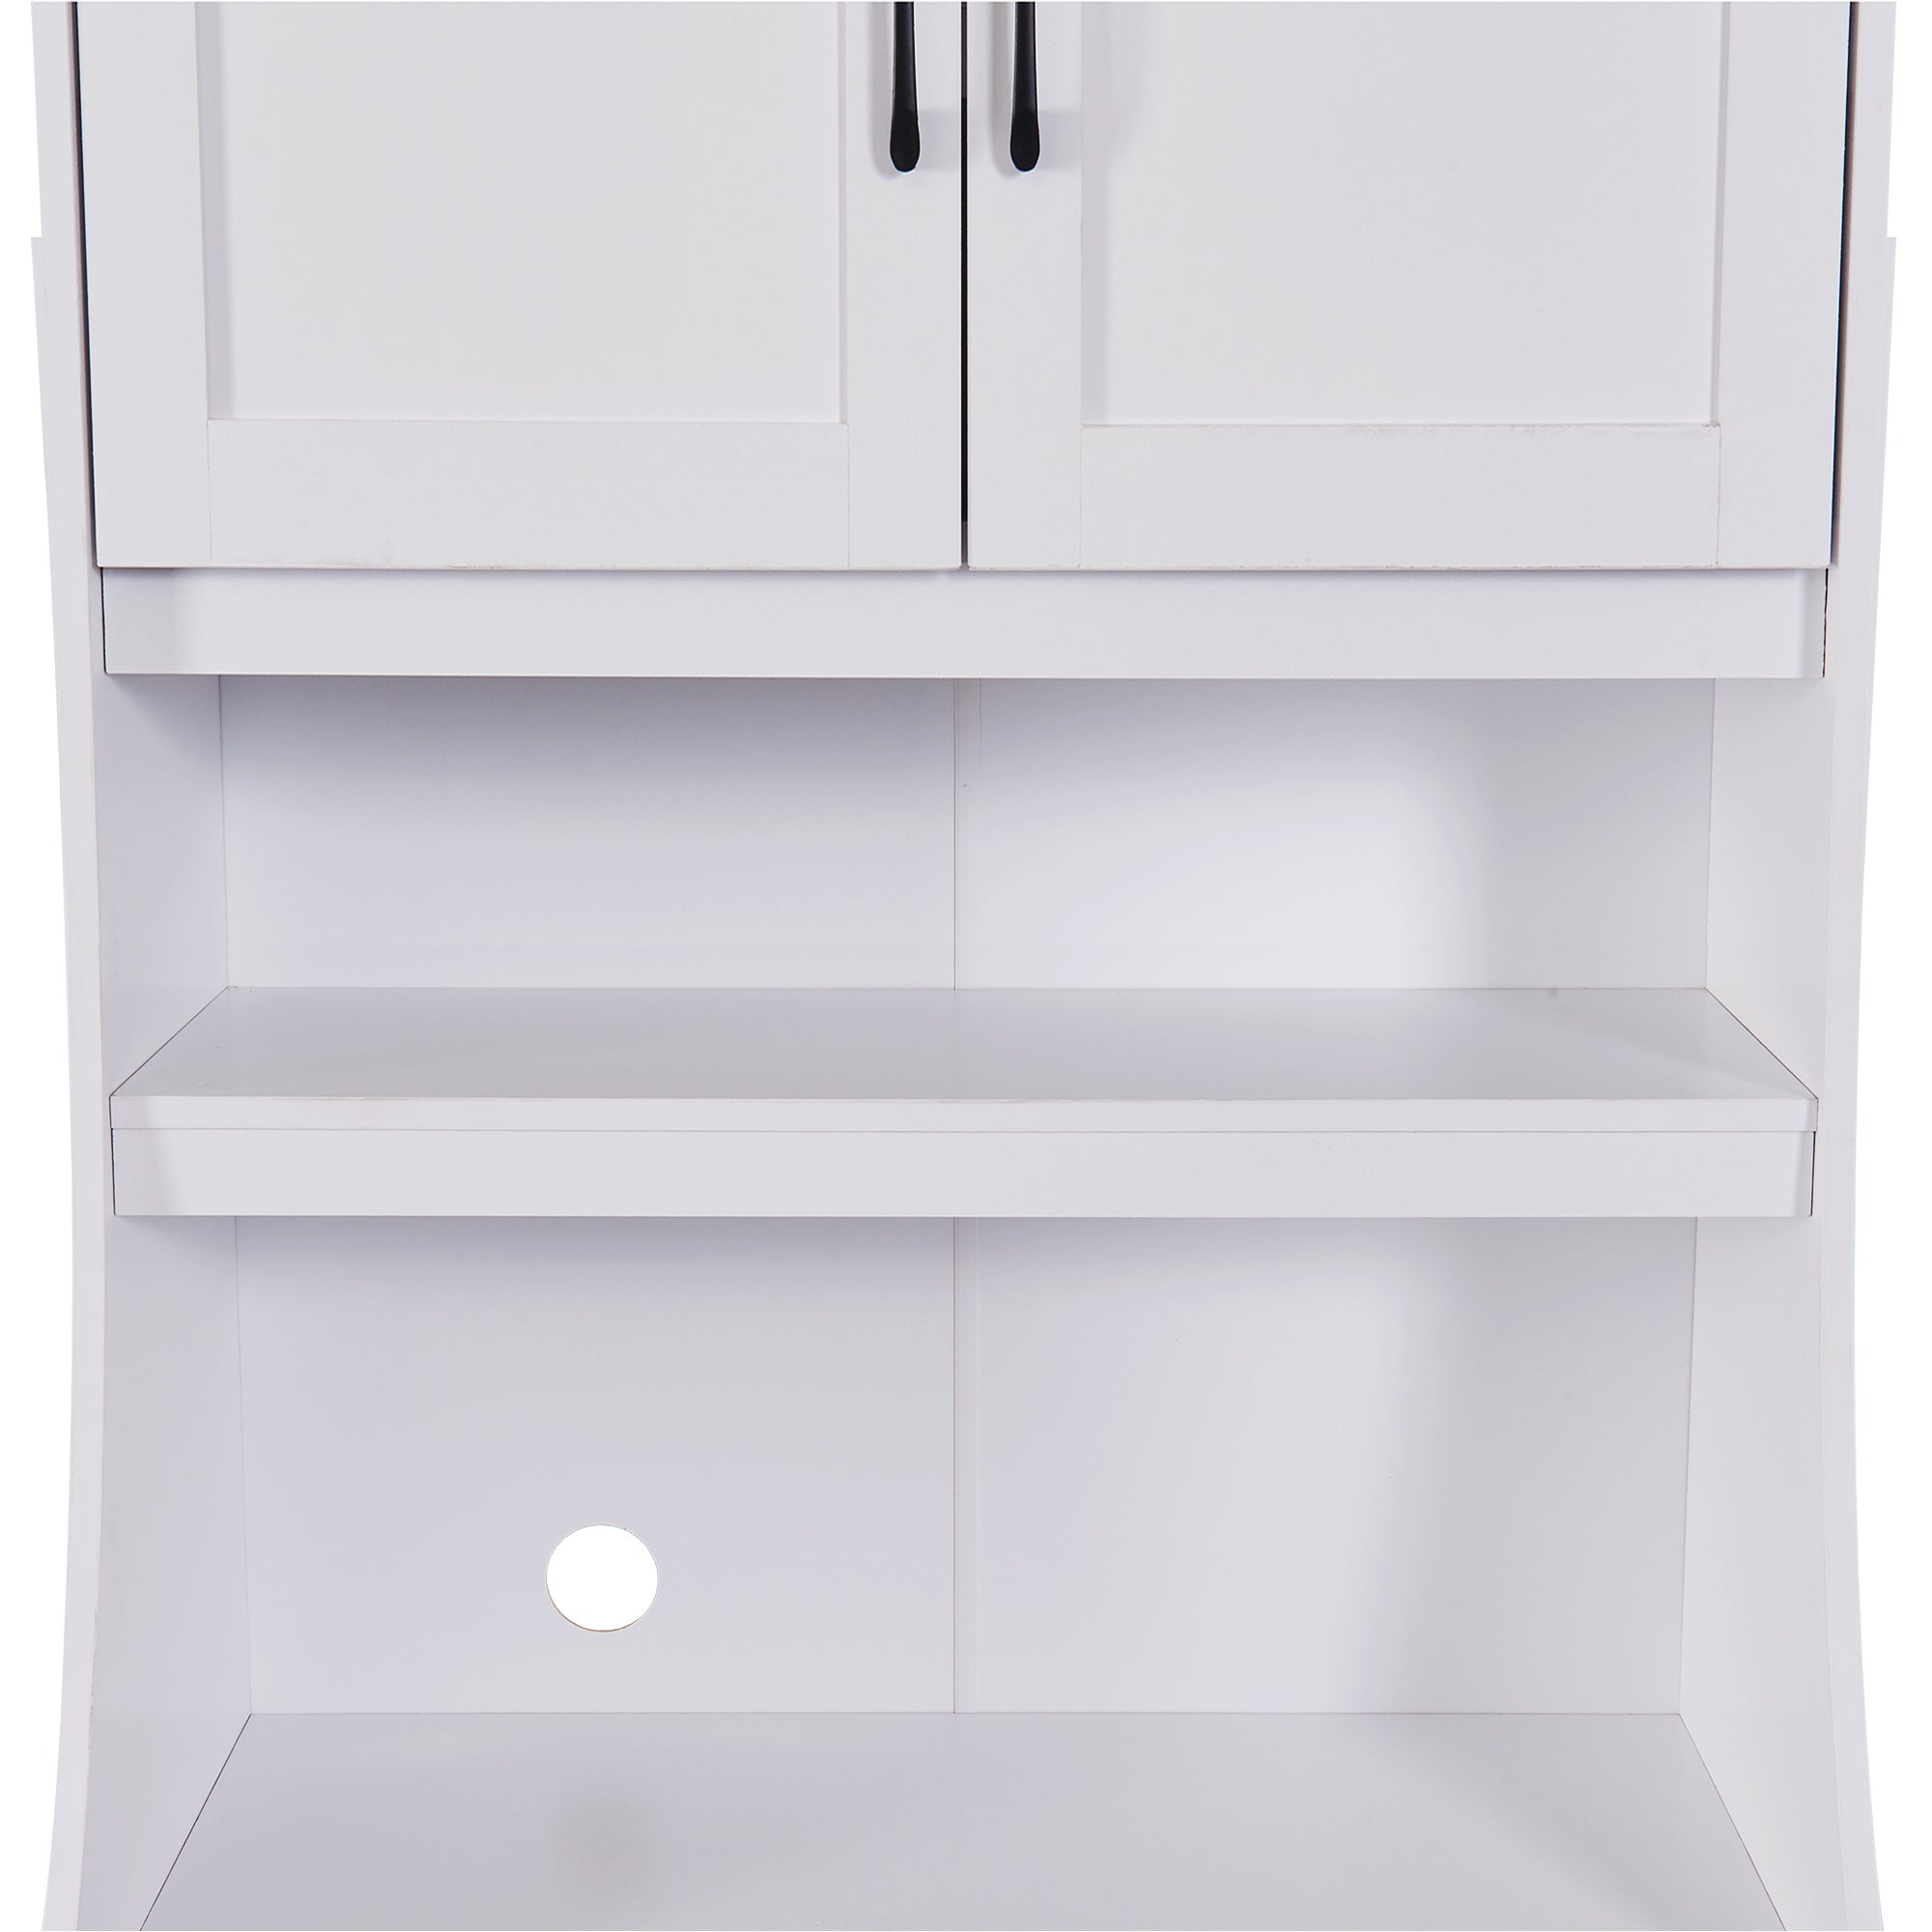 TREXM One-body Style Pantry Cabinet Kitchen Living Room Dining Room Storage Buffet with Doors, Adjustable Shelves (White)